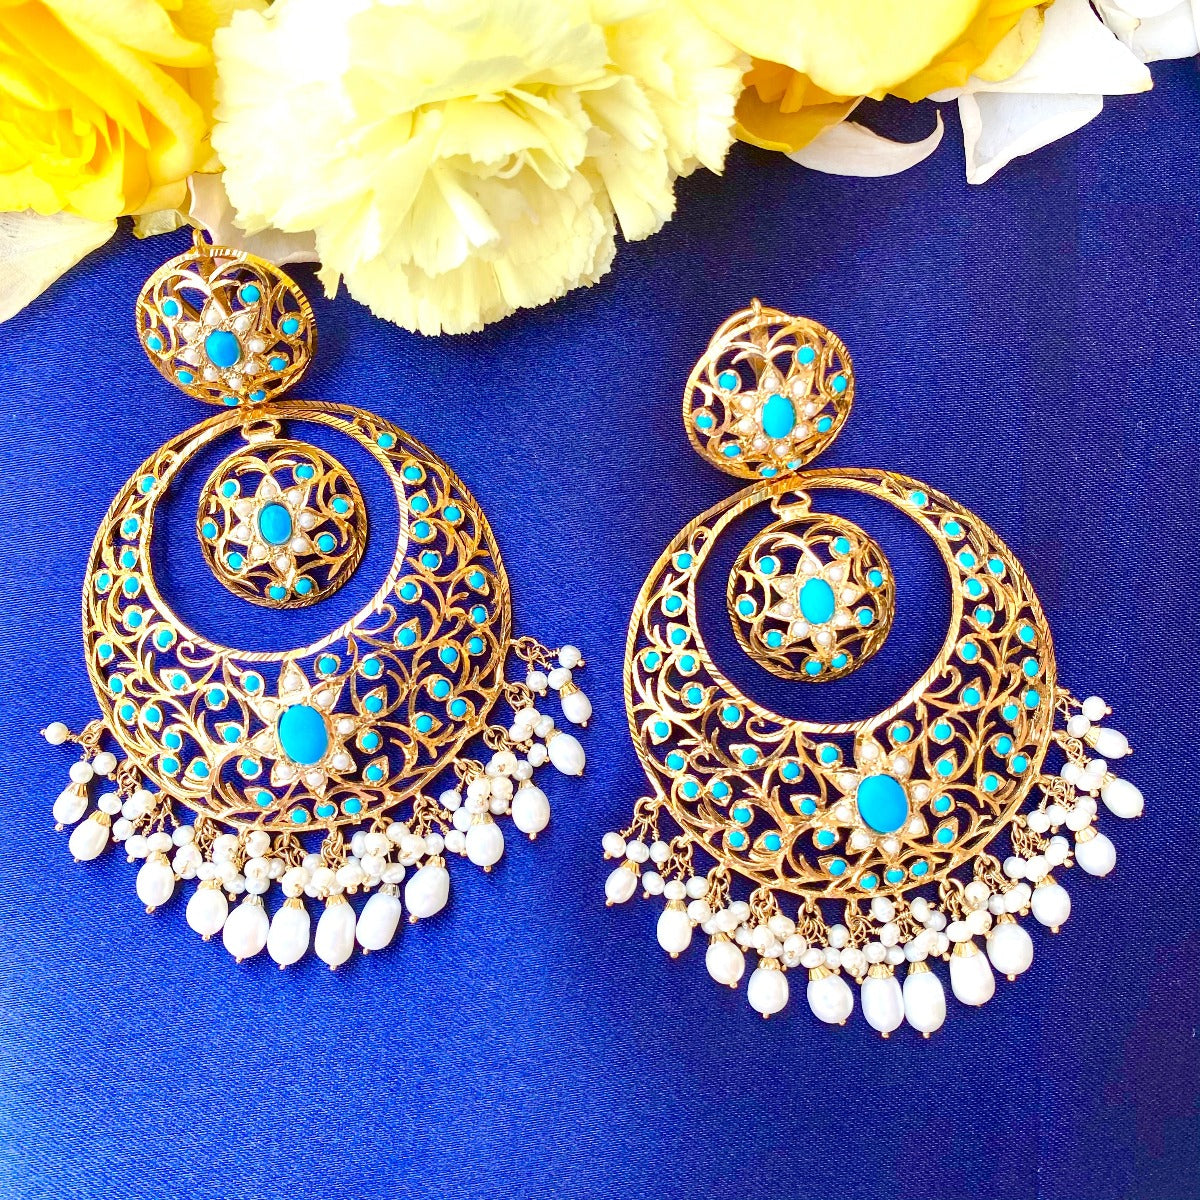 chandbali earrings with gold plating